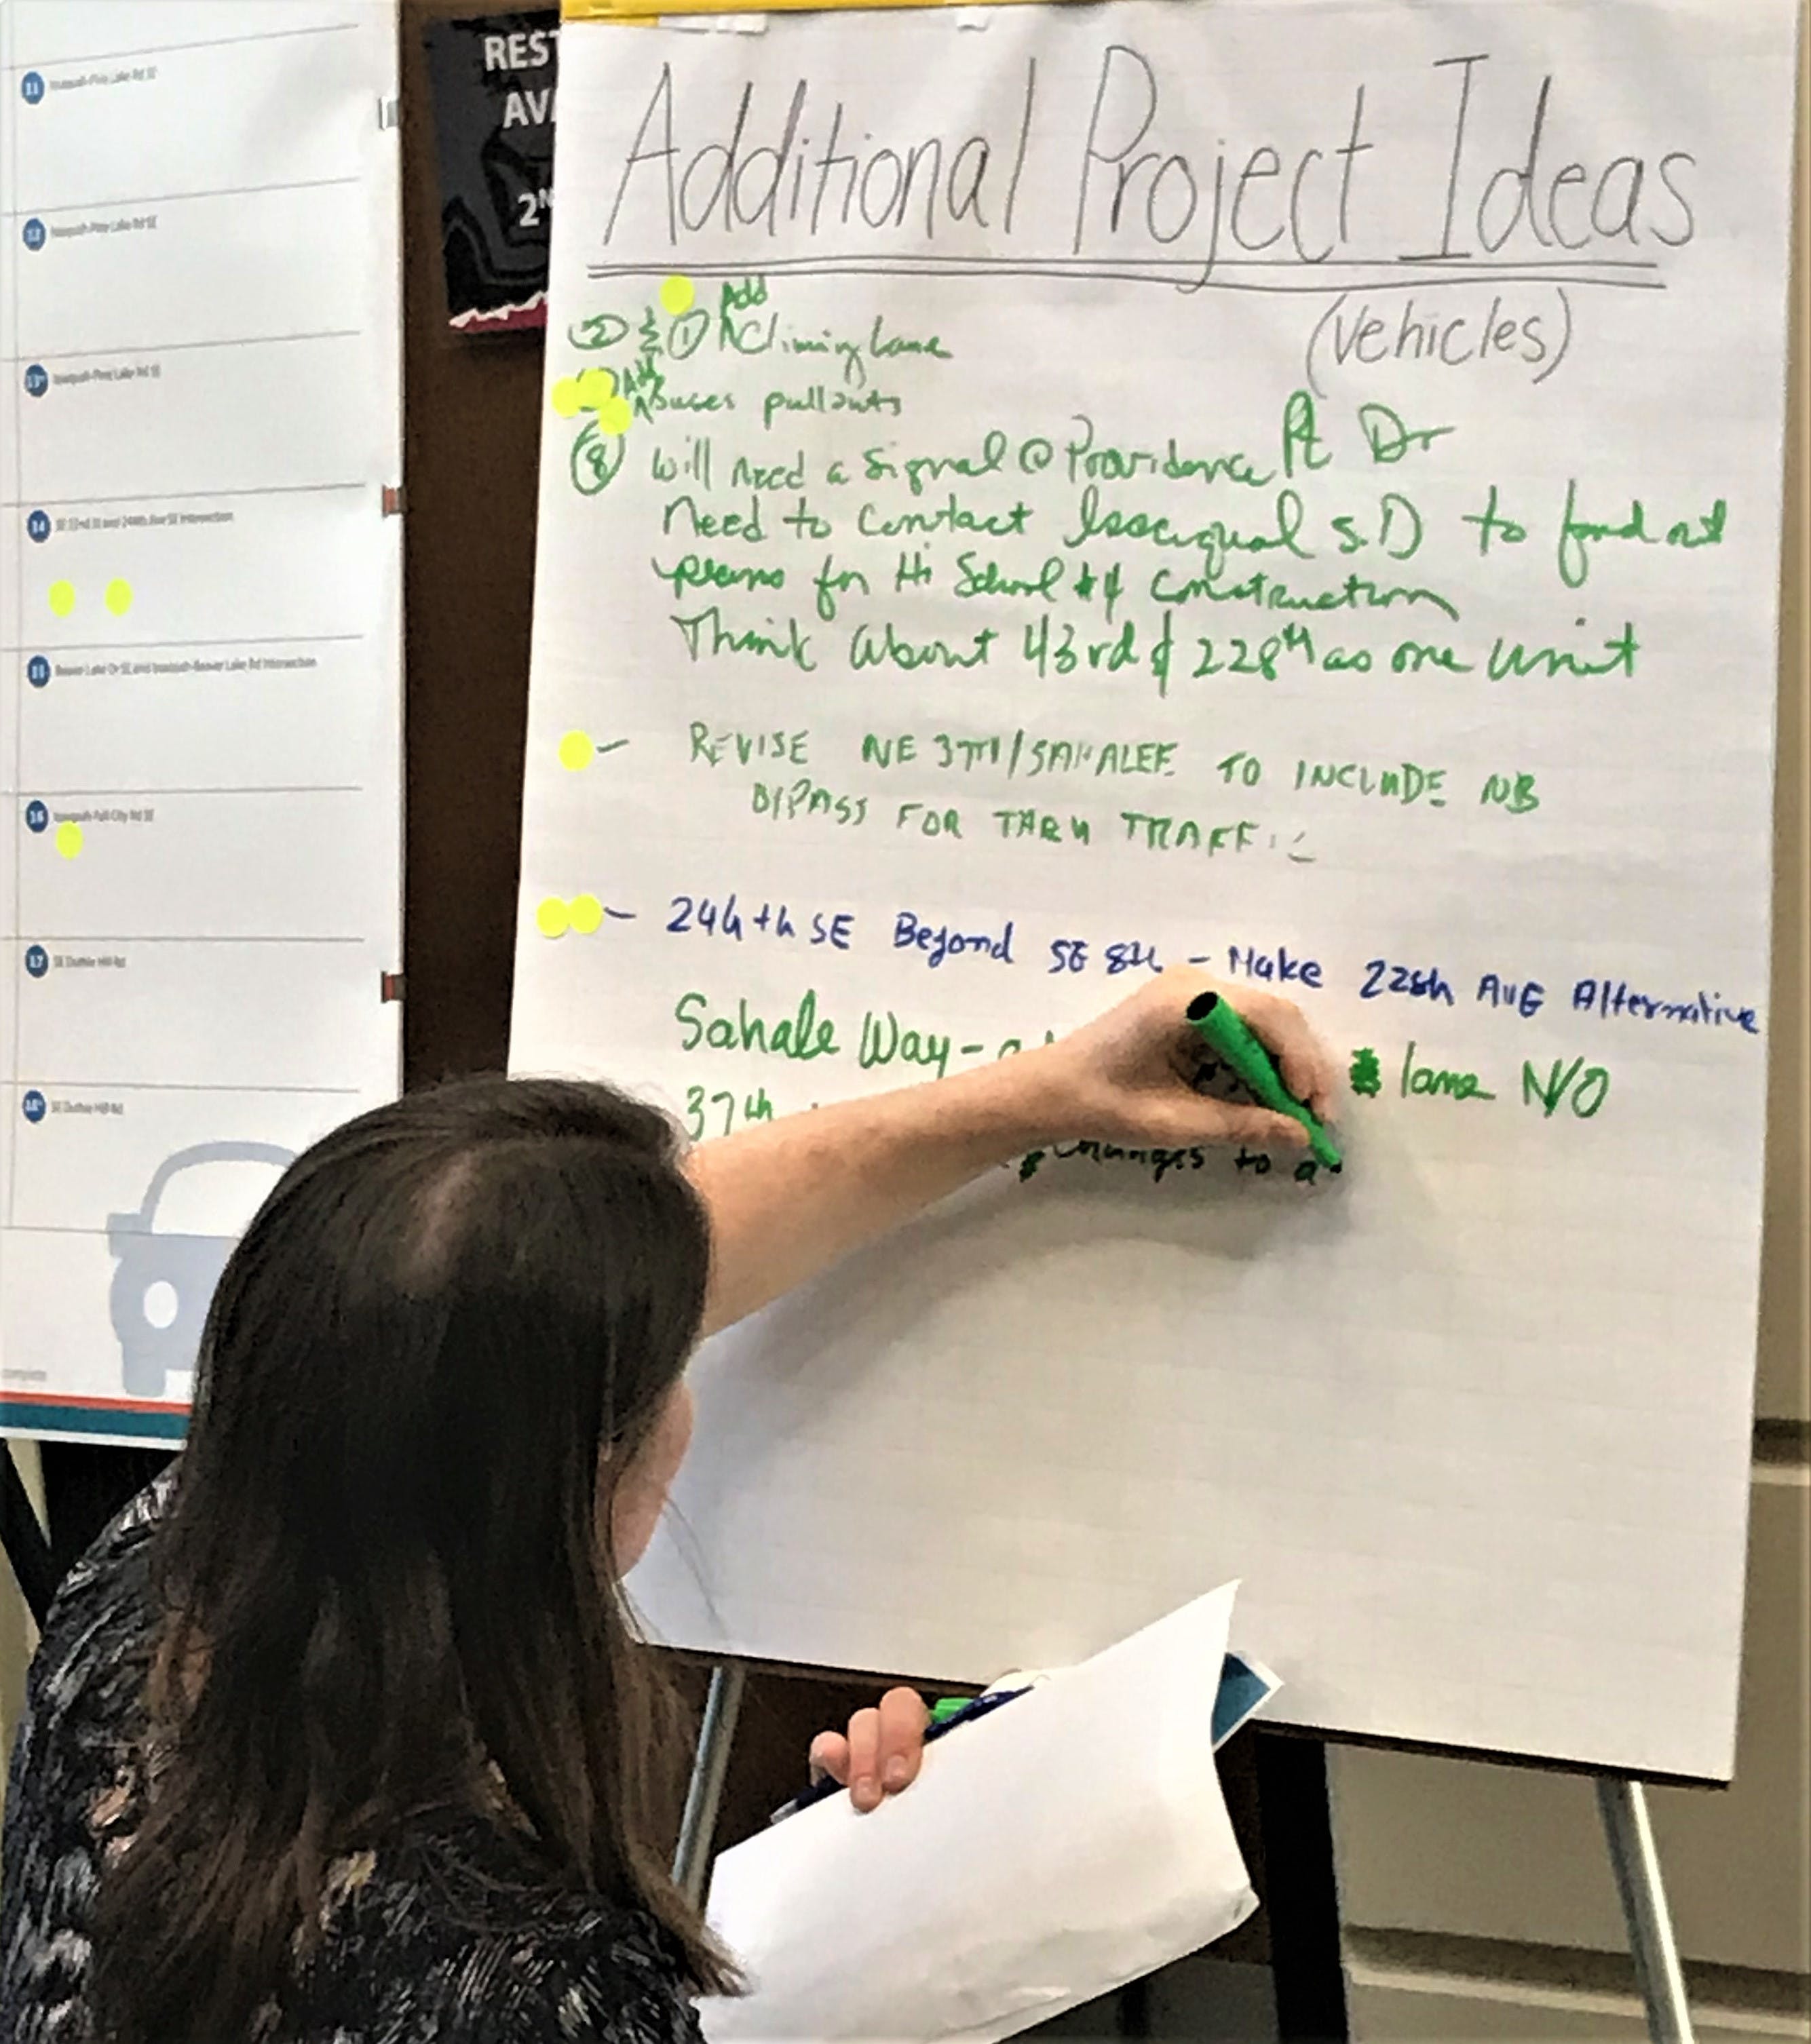 A woman adds additional ideas with a green marker onto a board during a public Transportation Master Plan workshop.